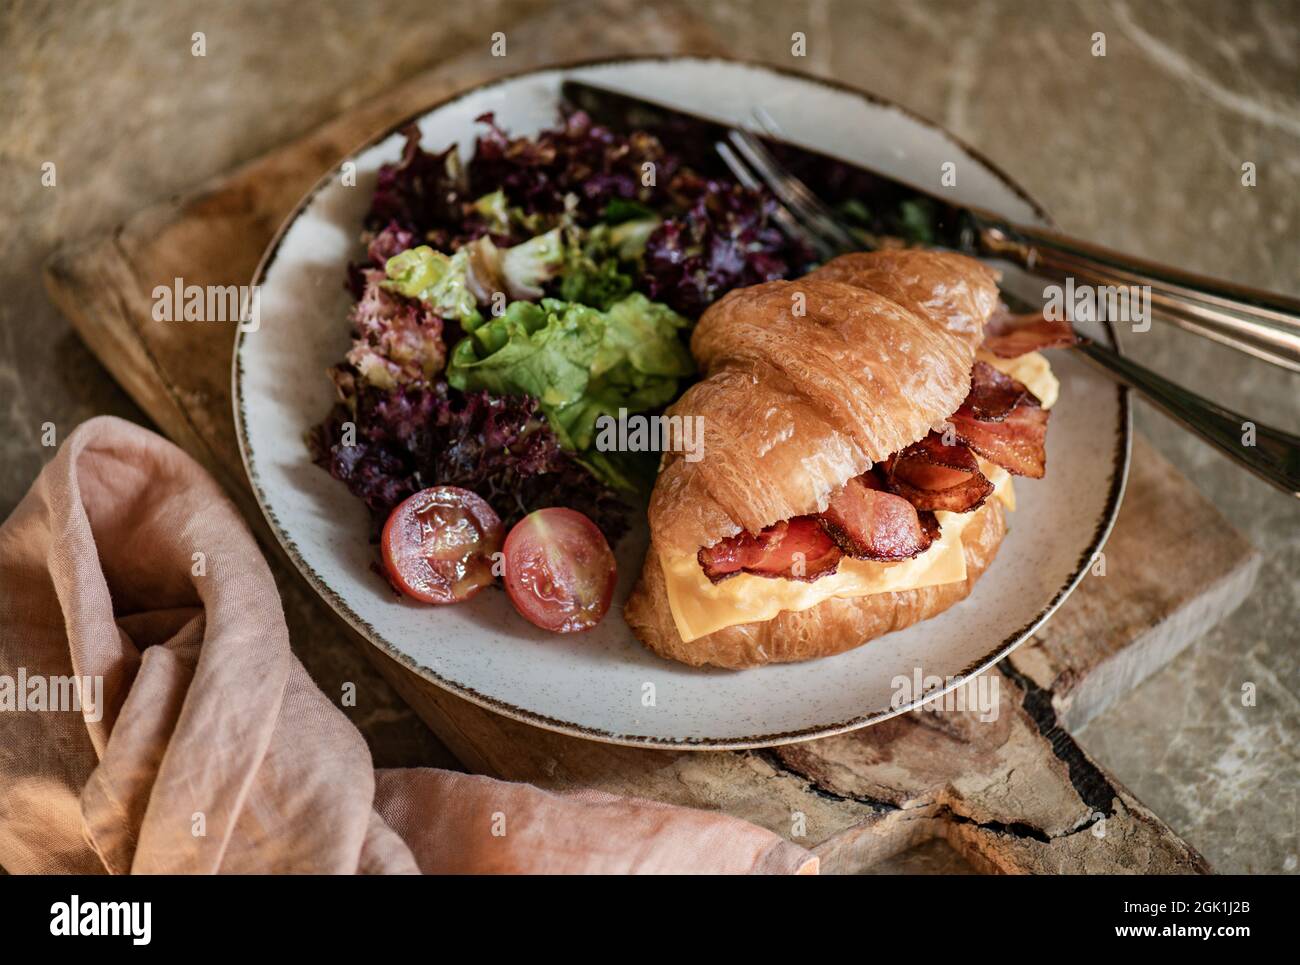 Bacon and cheddar cheese stuffed French croissant, horizontal composition Stock Photo